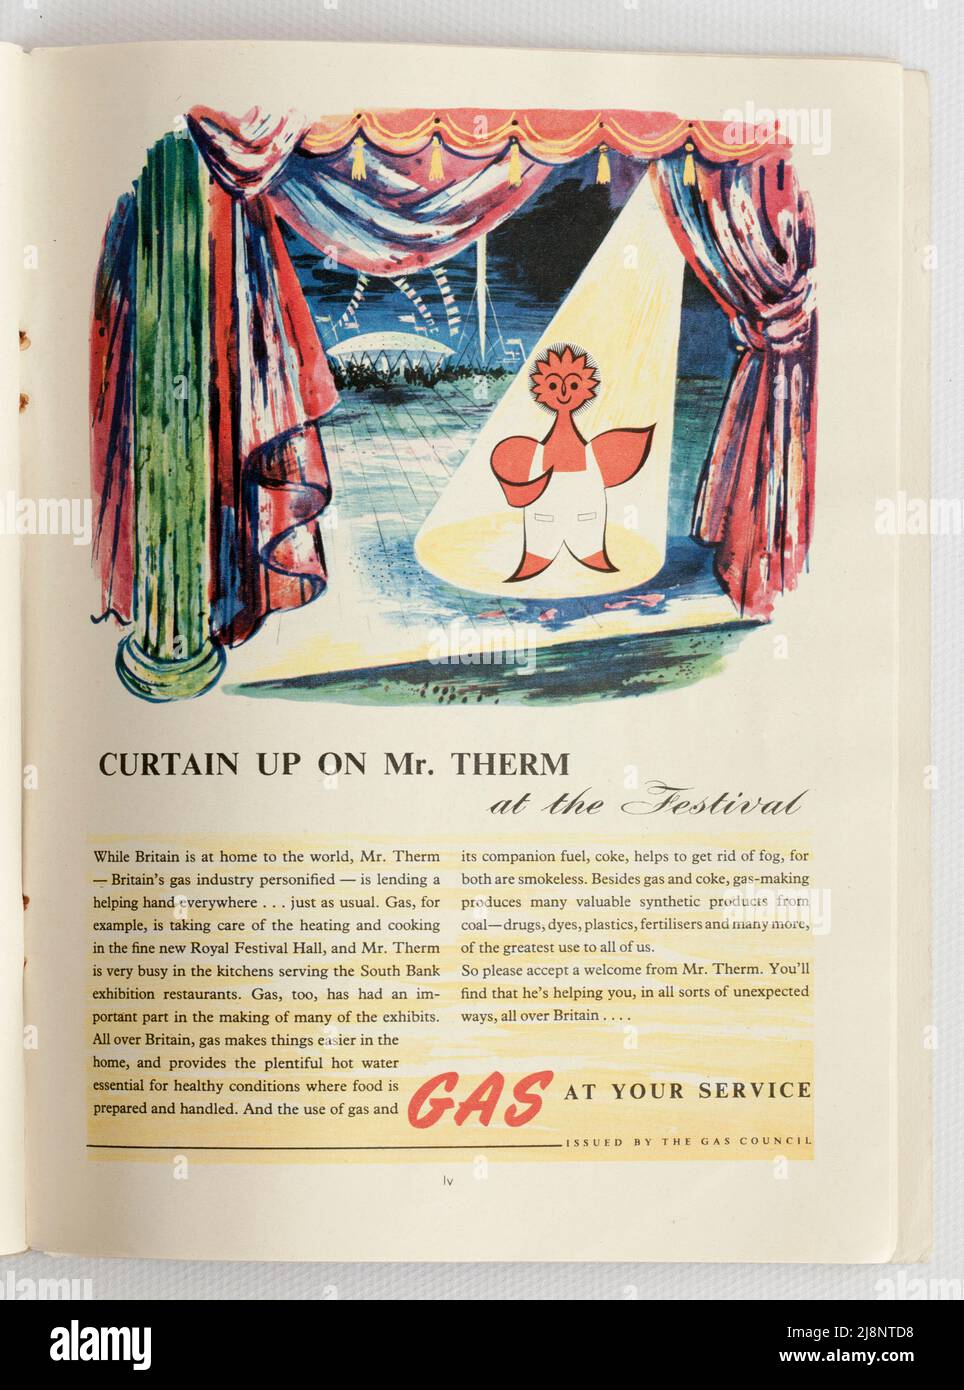 Old 1950s British Advertising for the Gas Council Stock Photo